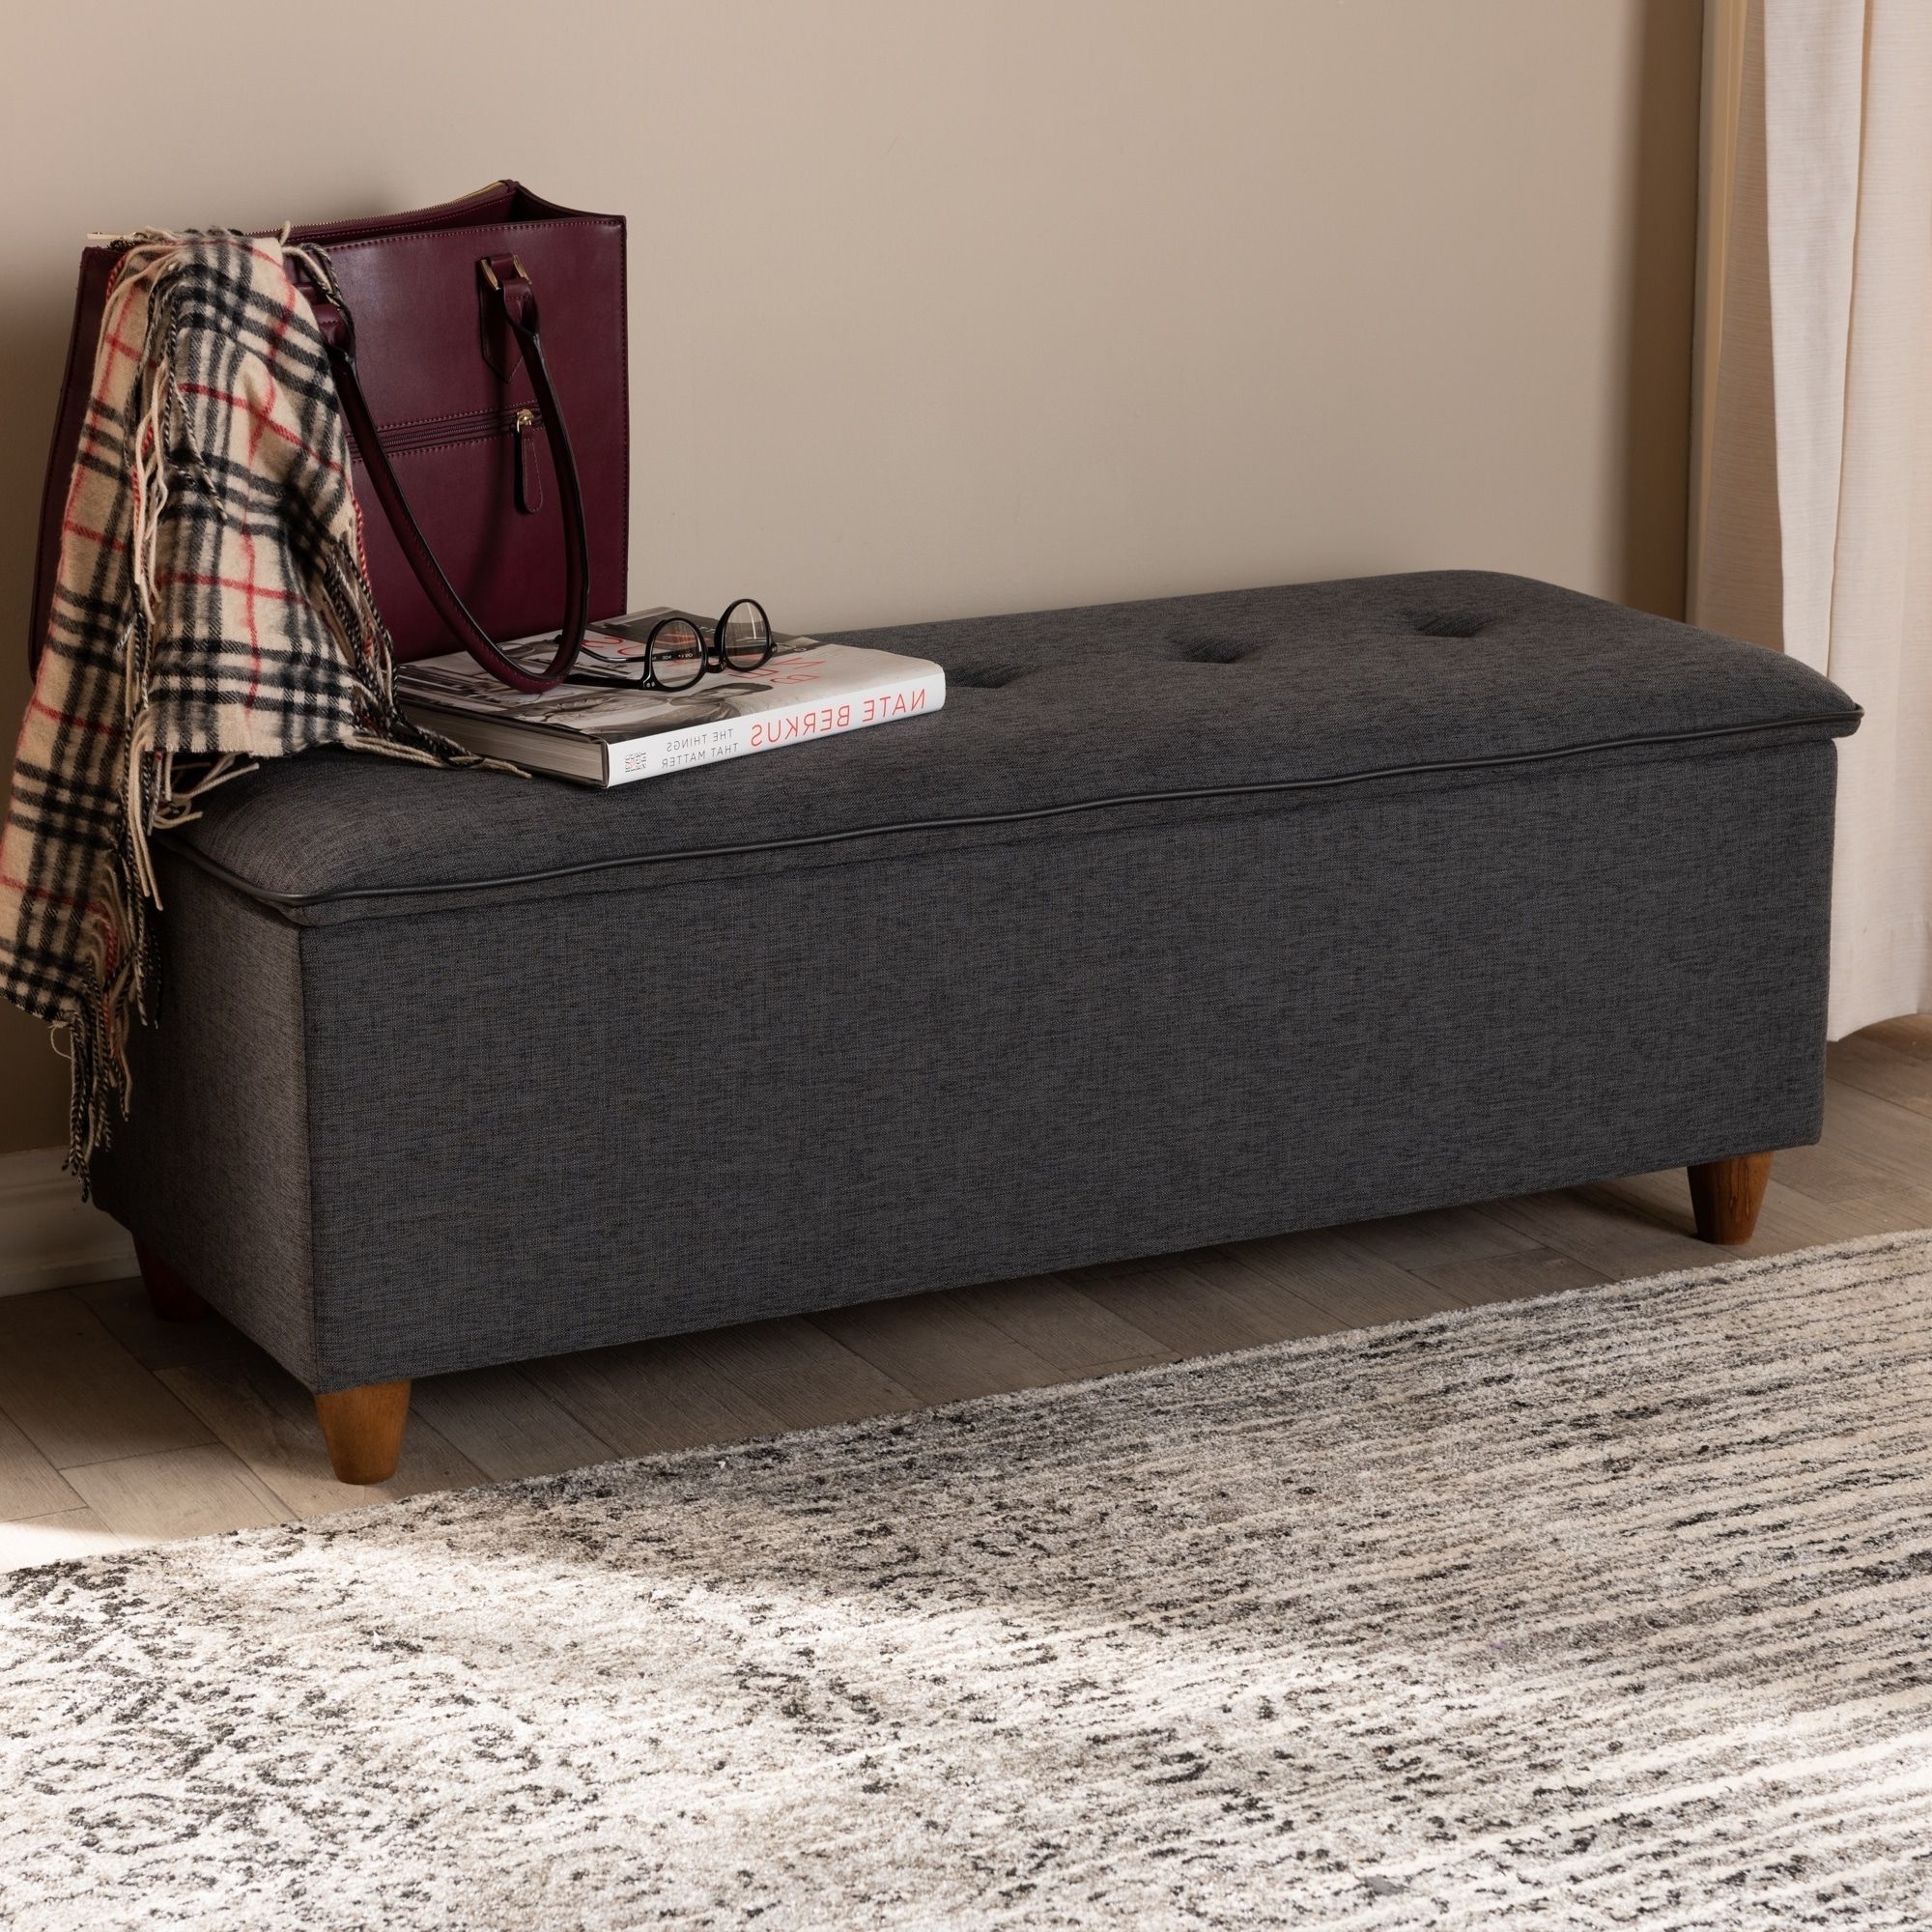 2019 Charcoal Fabric Tufted Storage Ottomans Throughout Mid Century Fabric Storage Ottomanbaxton Studio Charcoal Medium (View 3 of 10)